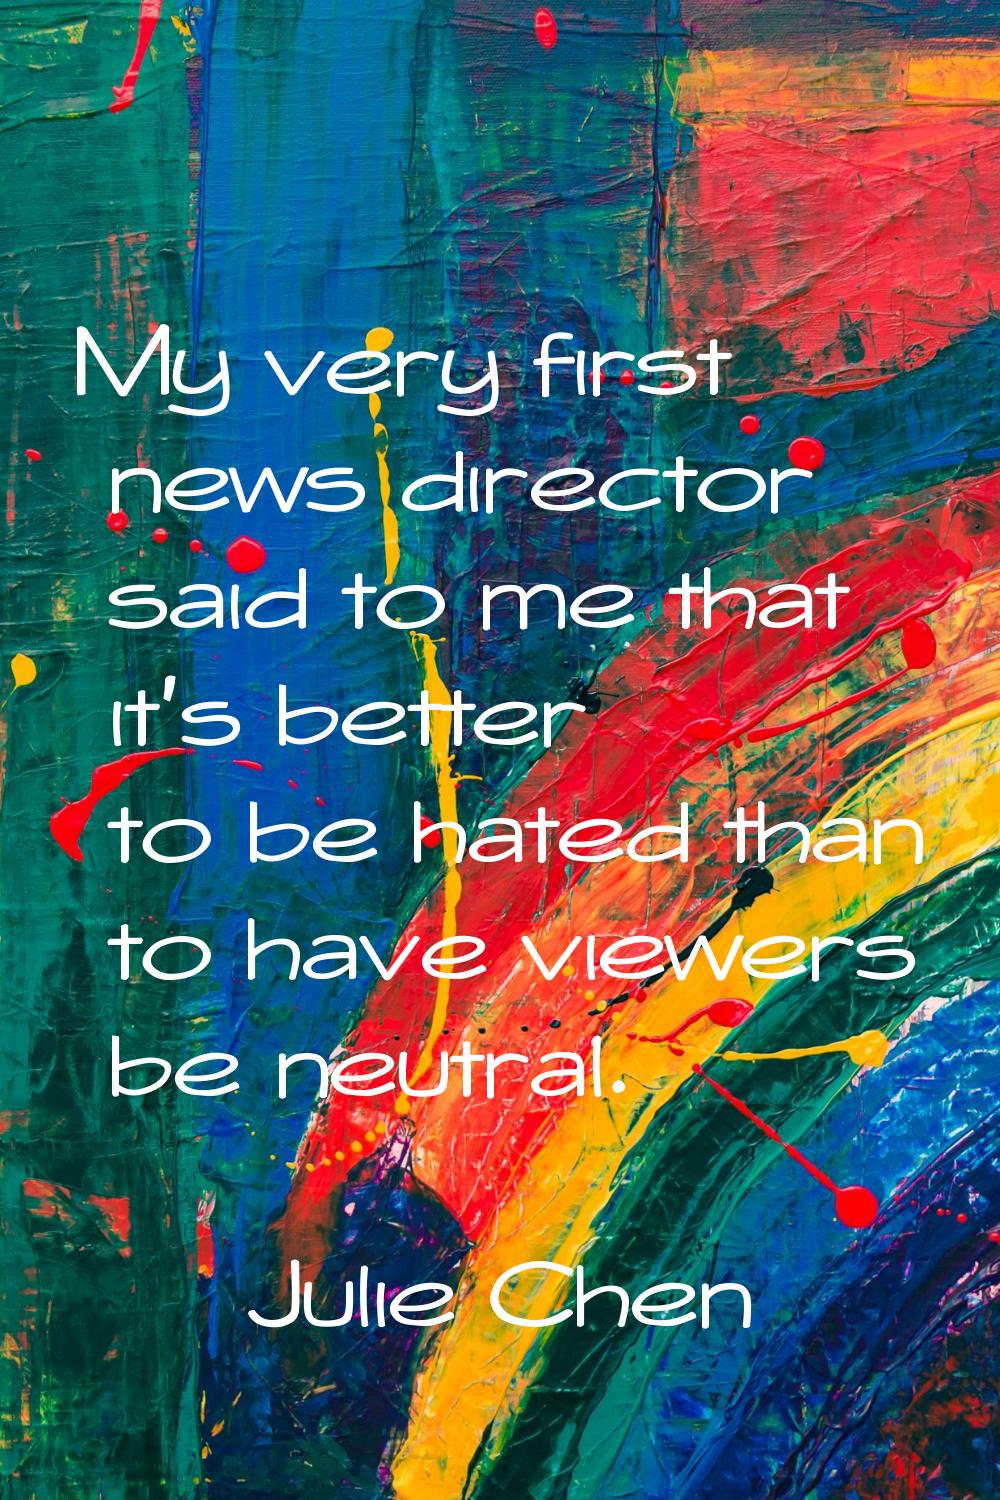 My very first news director said to me that it's better to be hated than to have viewers be neutral